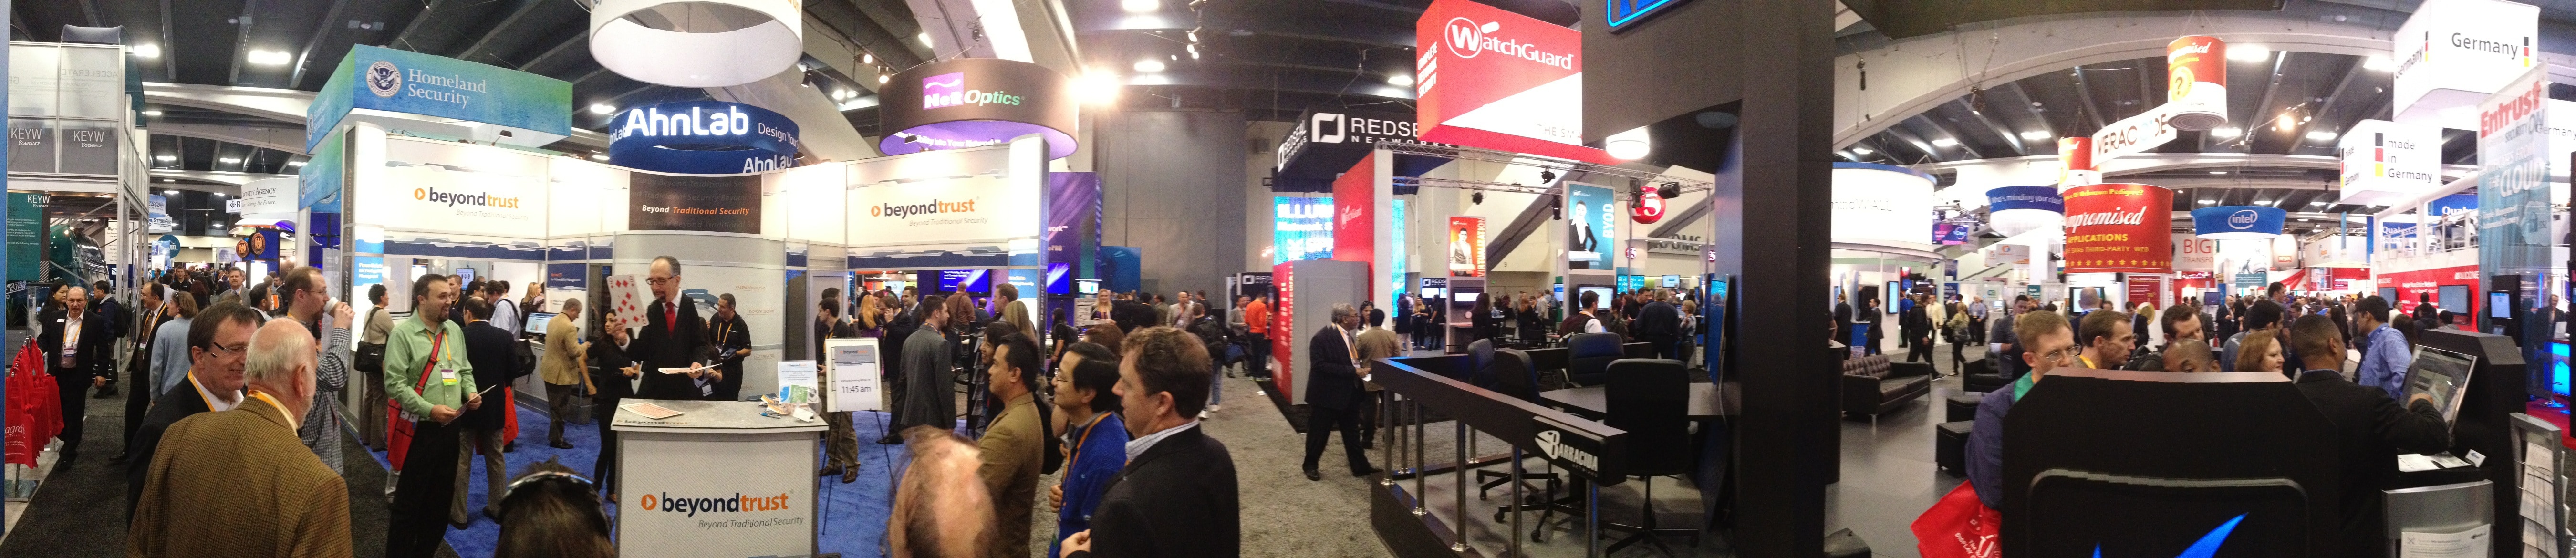 The Show Floor at RSA